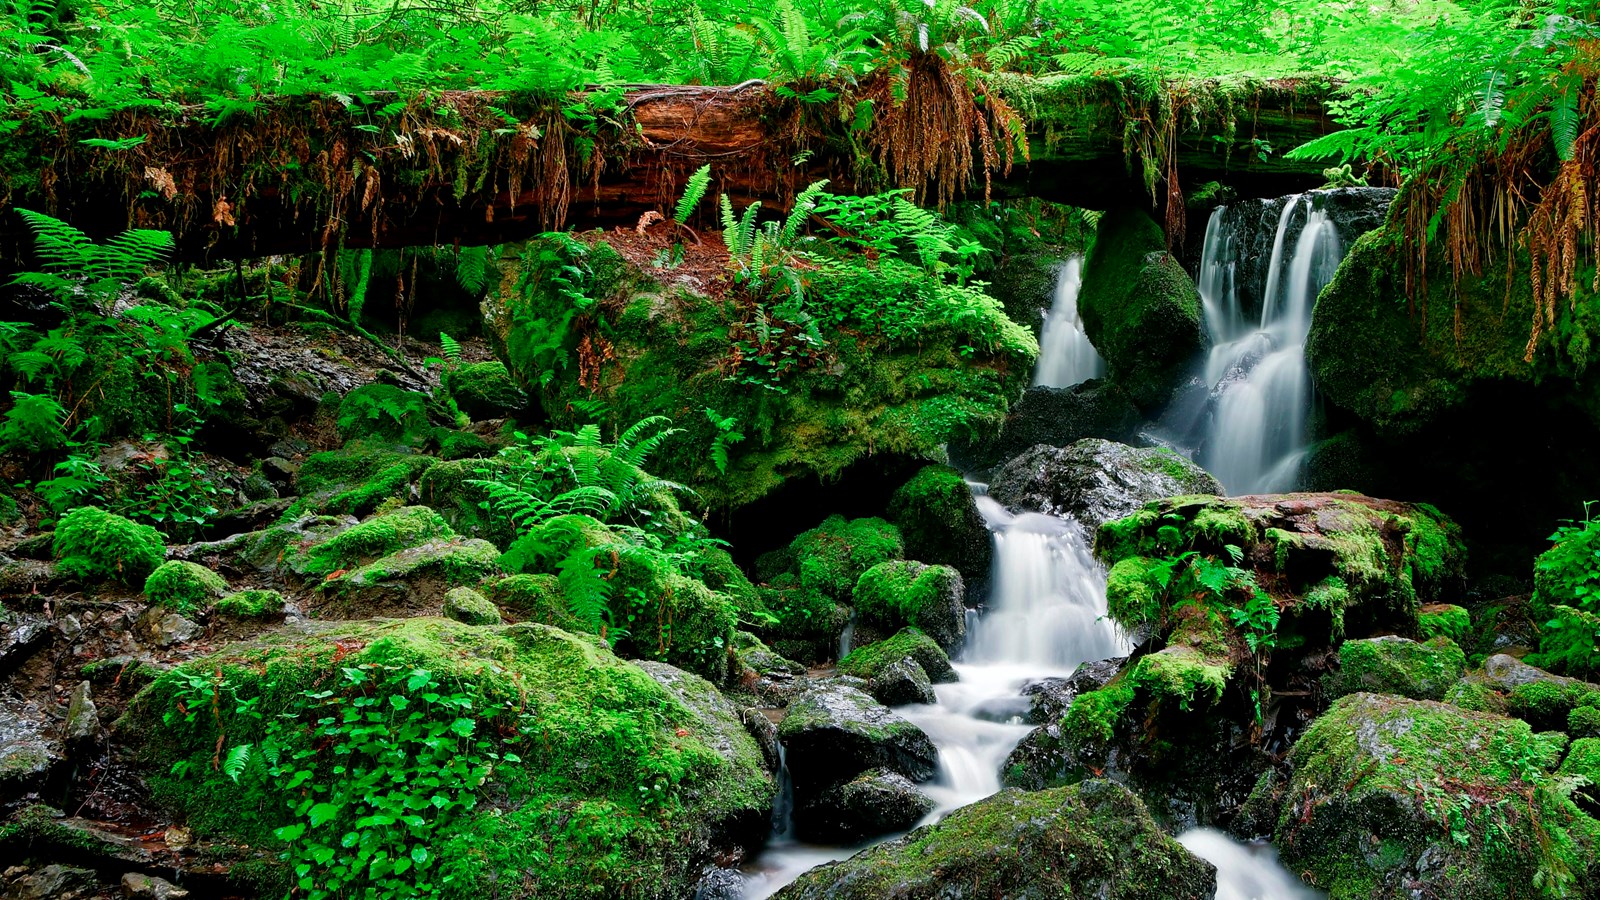 Fern and moss-covered rocks with water flowing over them.